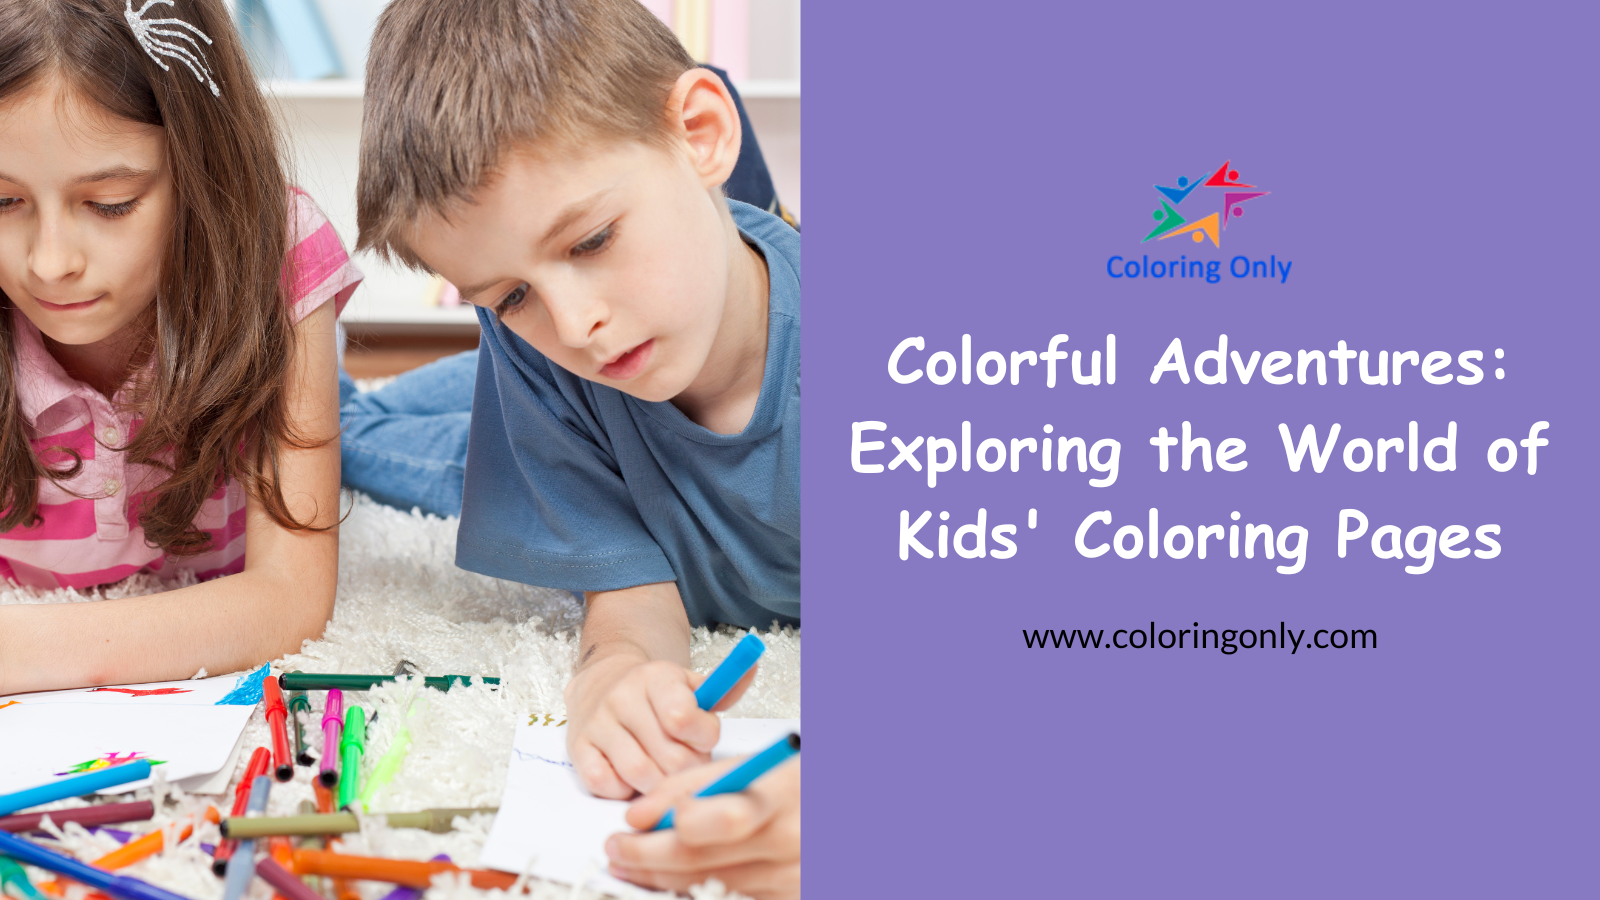 Colorful Adventures: Exploring the World of Kids’ Coloring Pages